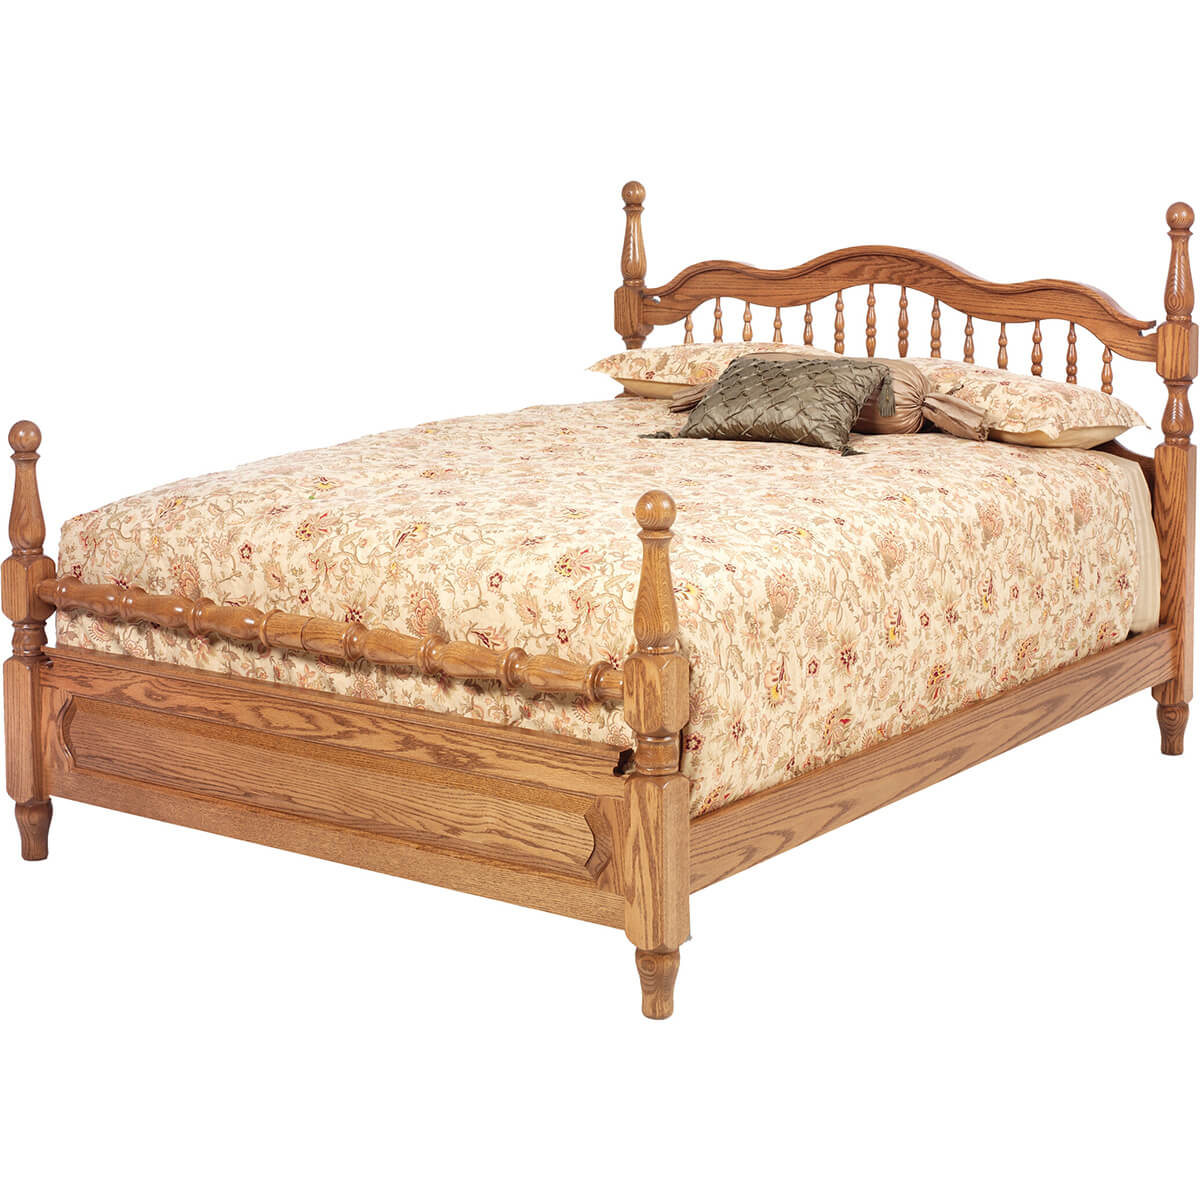 Read more about the article Sierra Classic Sierra Crest Bed